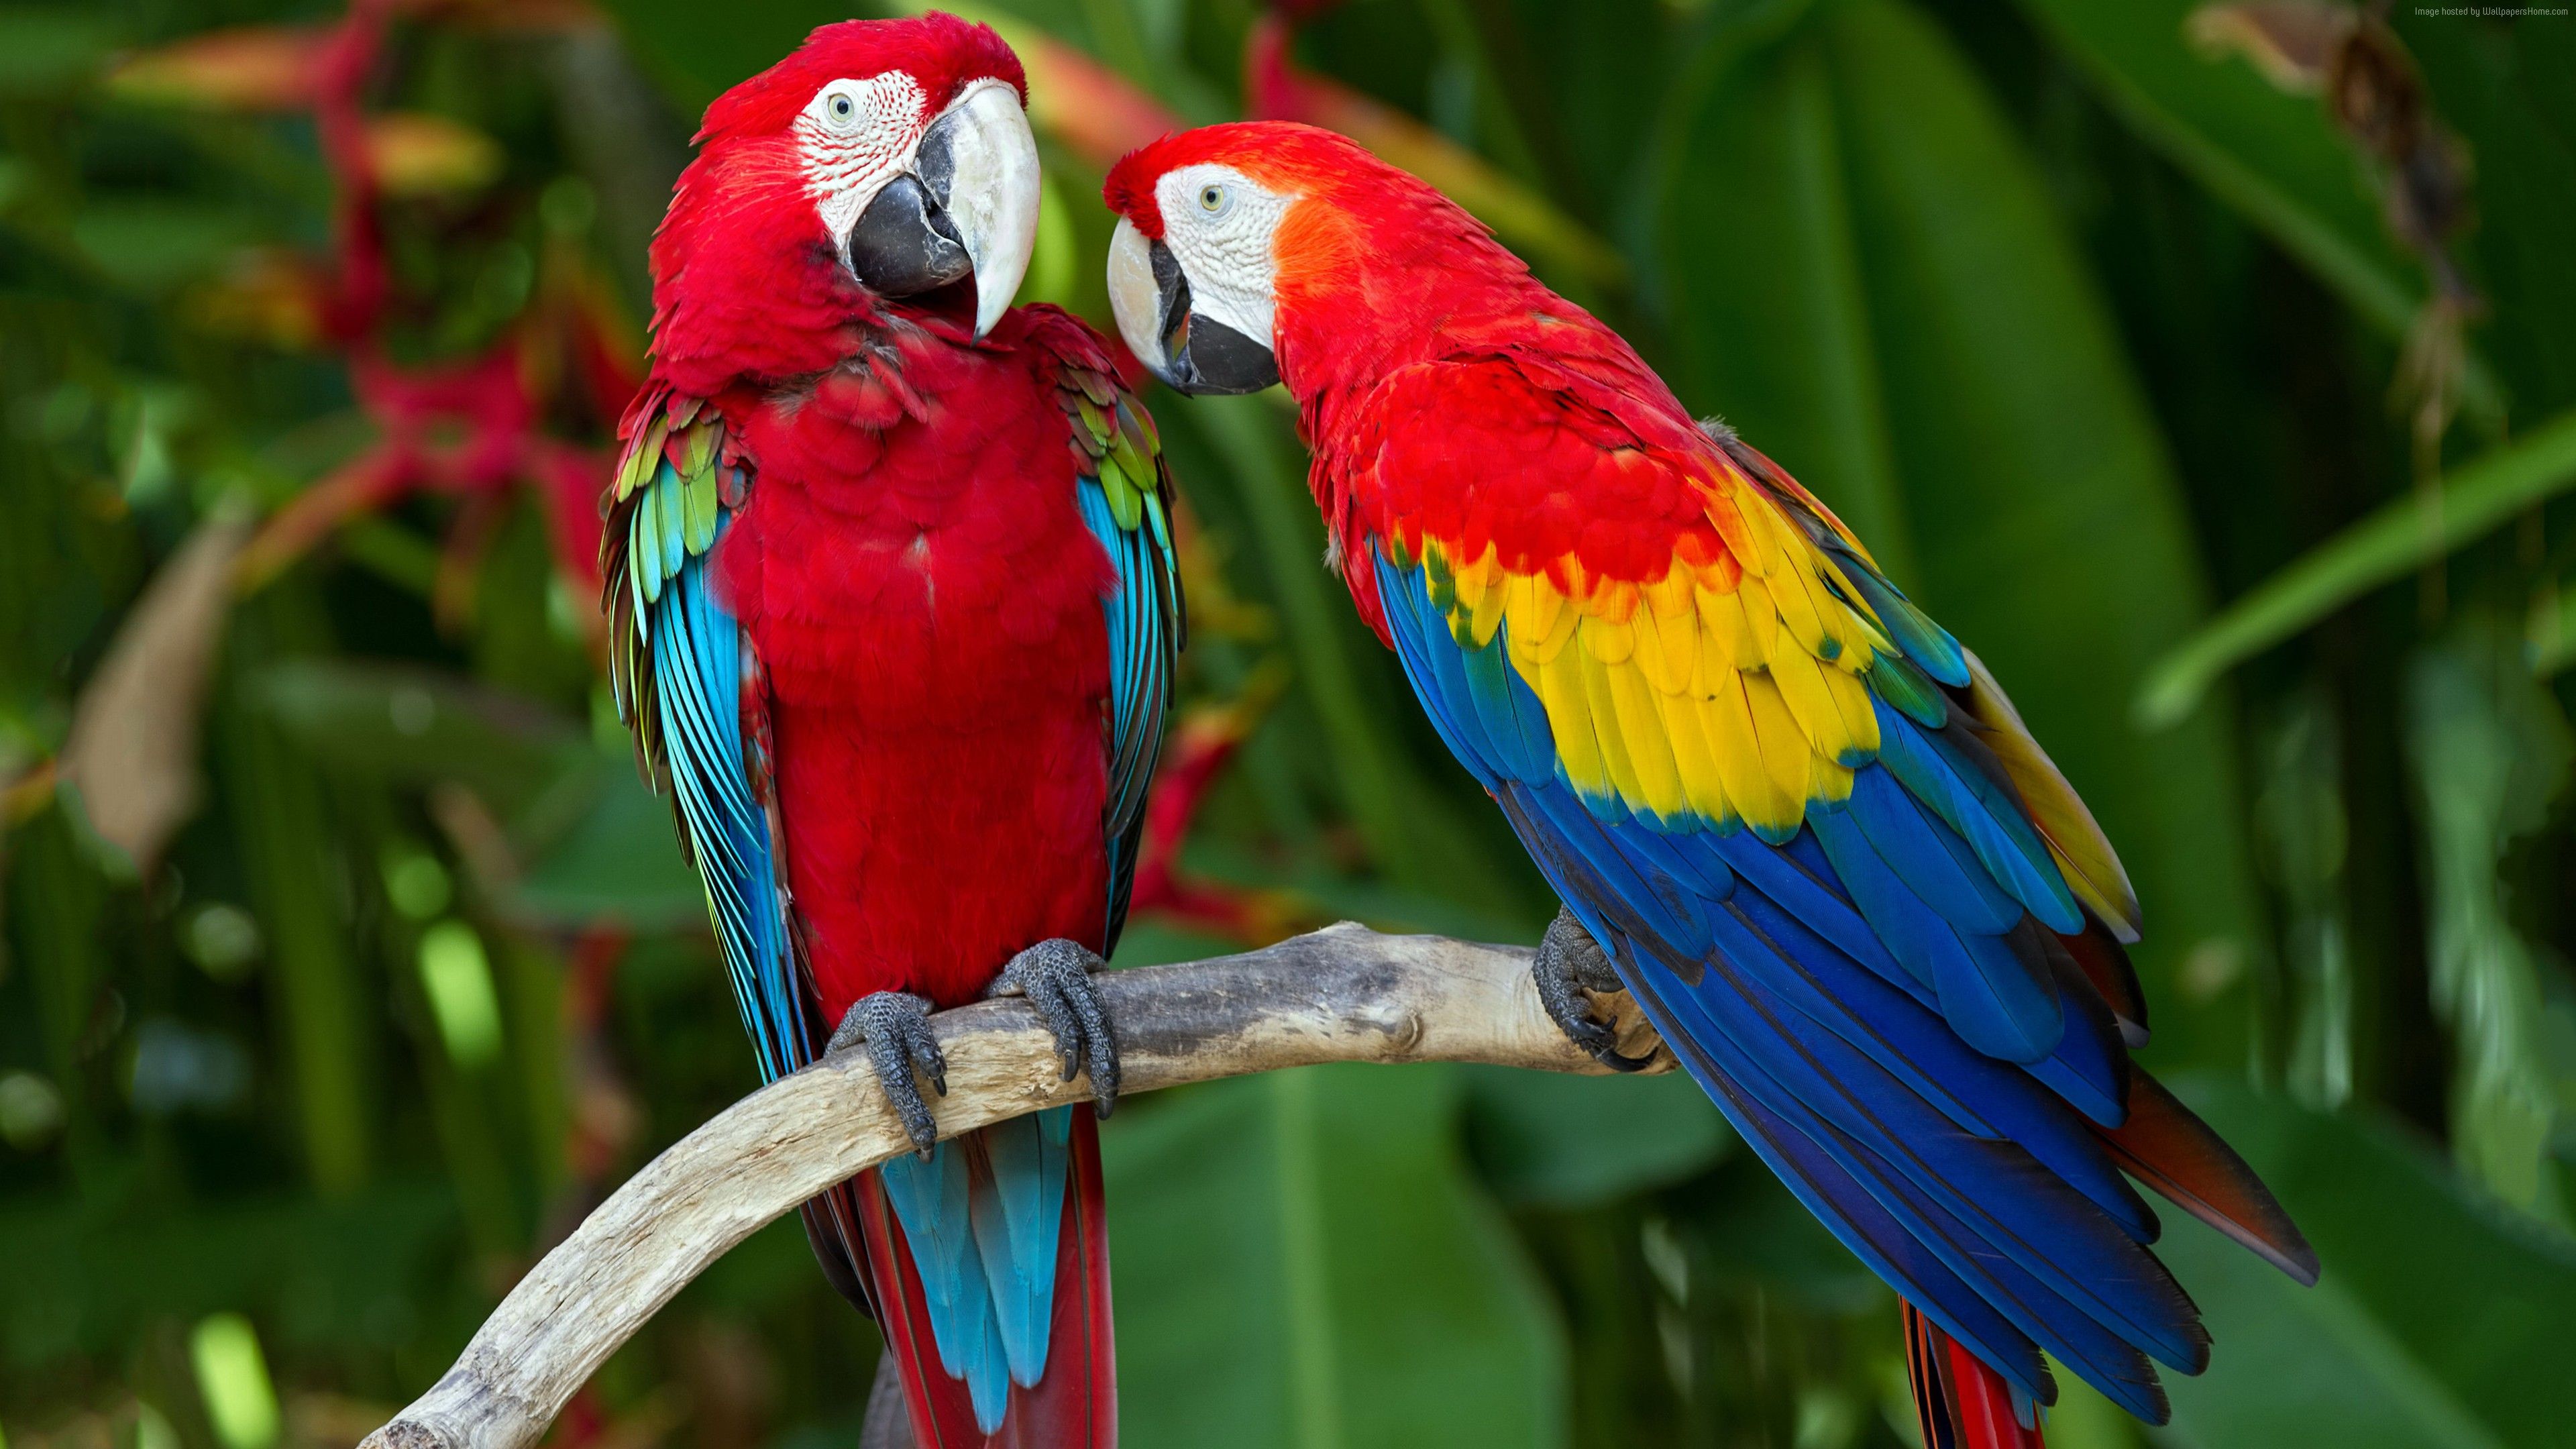 Scarlet Macaw Colorful Parrots Exotic Tropical Birds Red Blue And Yellow Feathers HD Wallpaper Ultra HD 4k Wallpaper For Desktop & Mobiles, Wallpaper13.com